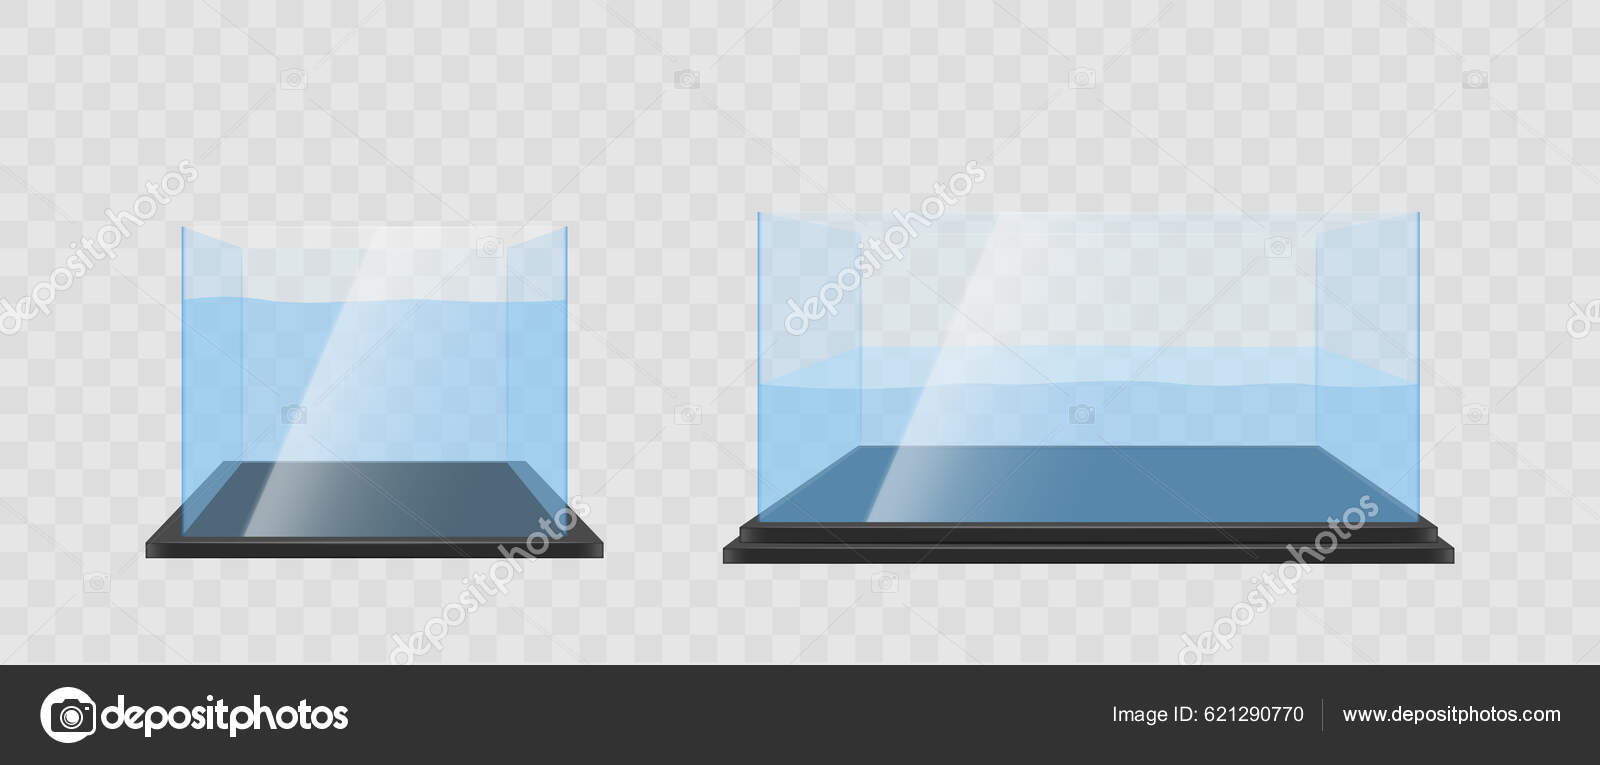 Realistic Transparent Glass With Water Isolated Stock Illustration